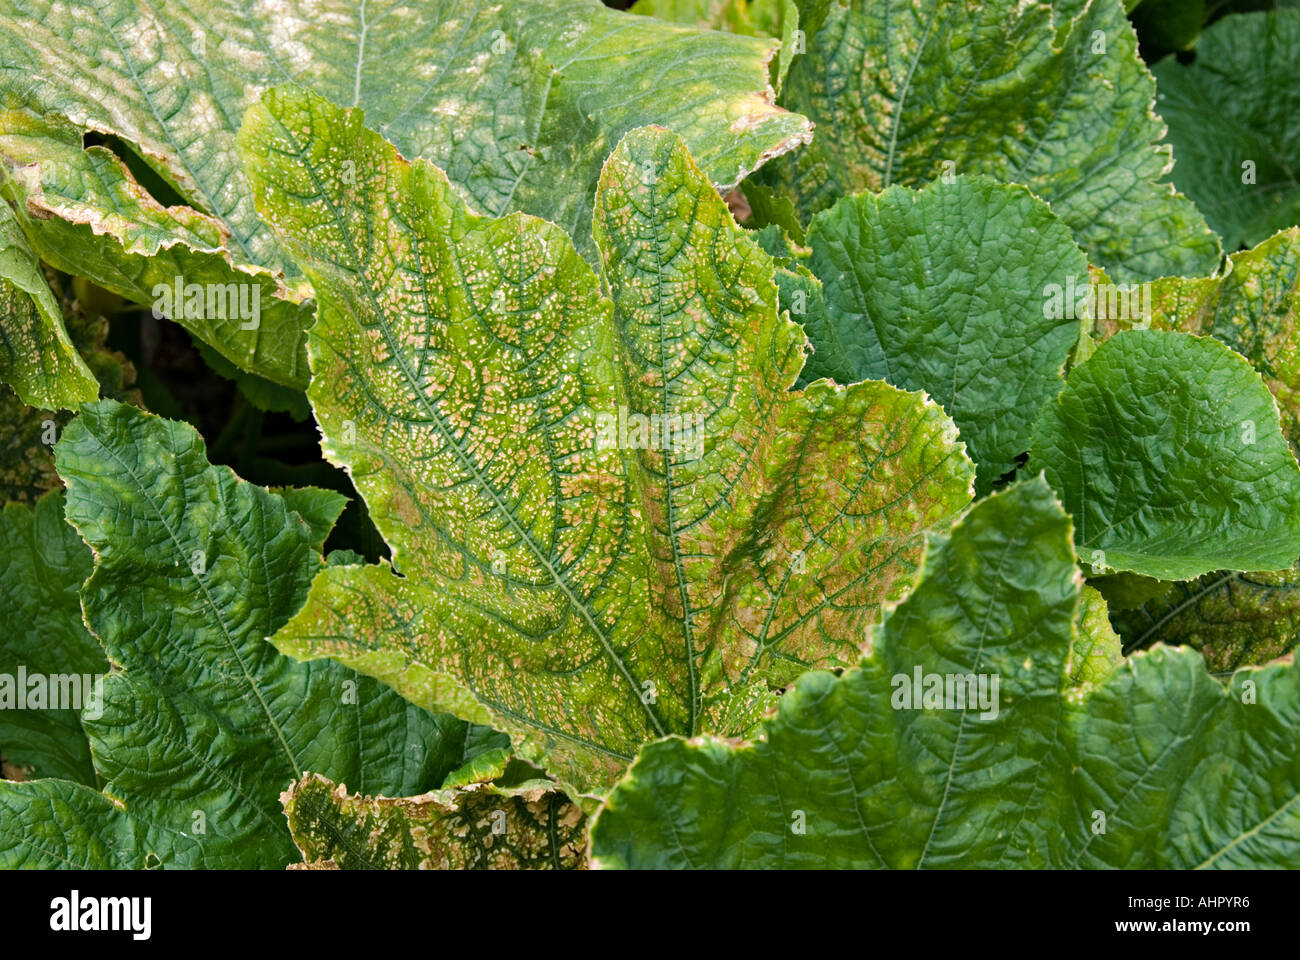 Leaves of courgette plants turning yellow Stock Photo - Alamy